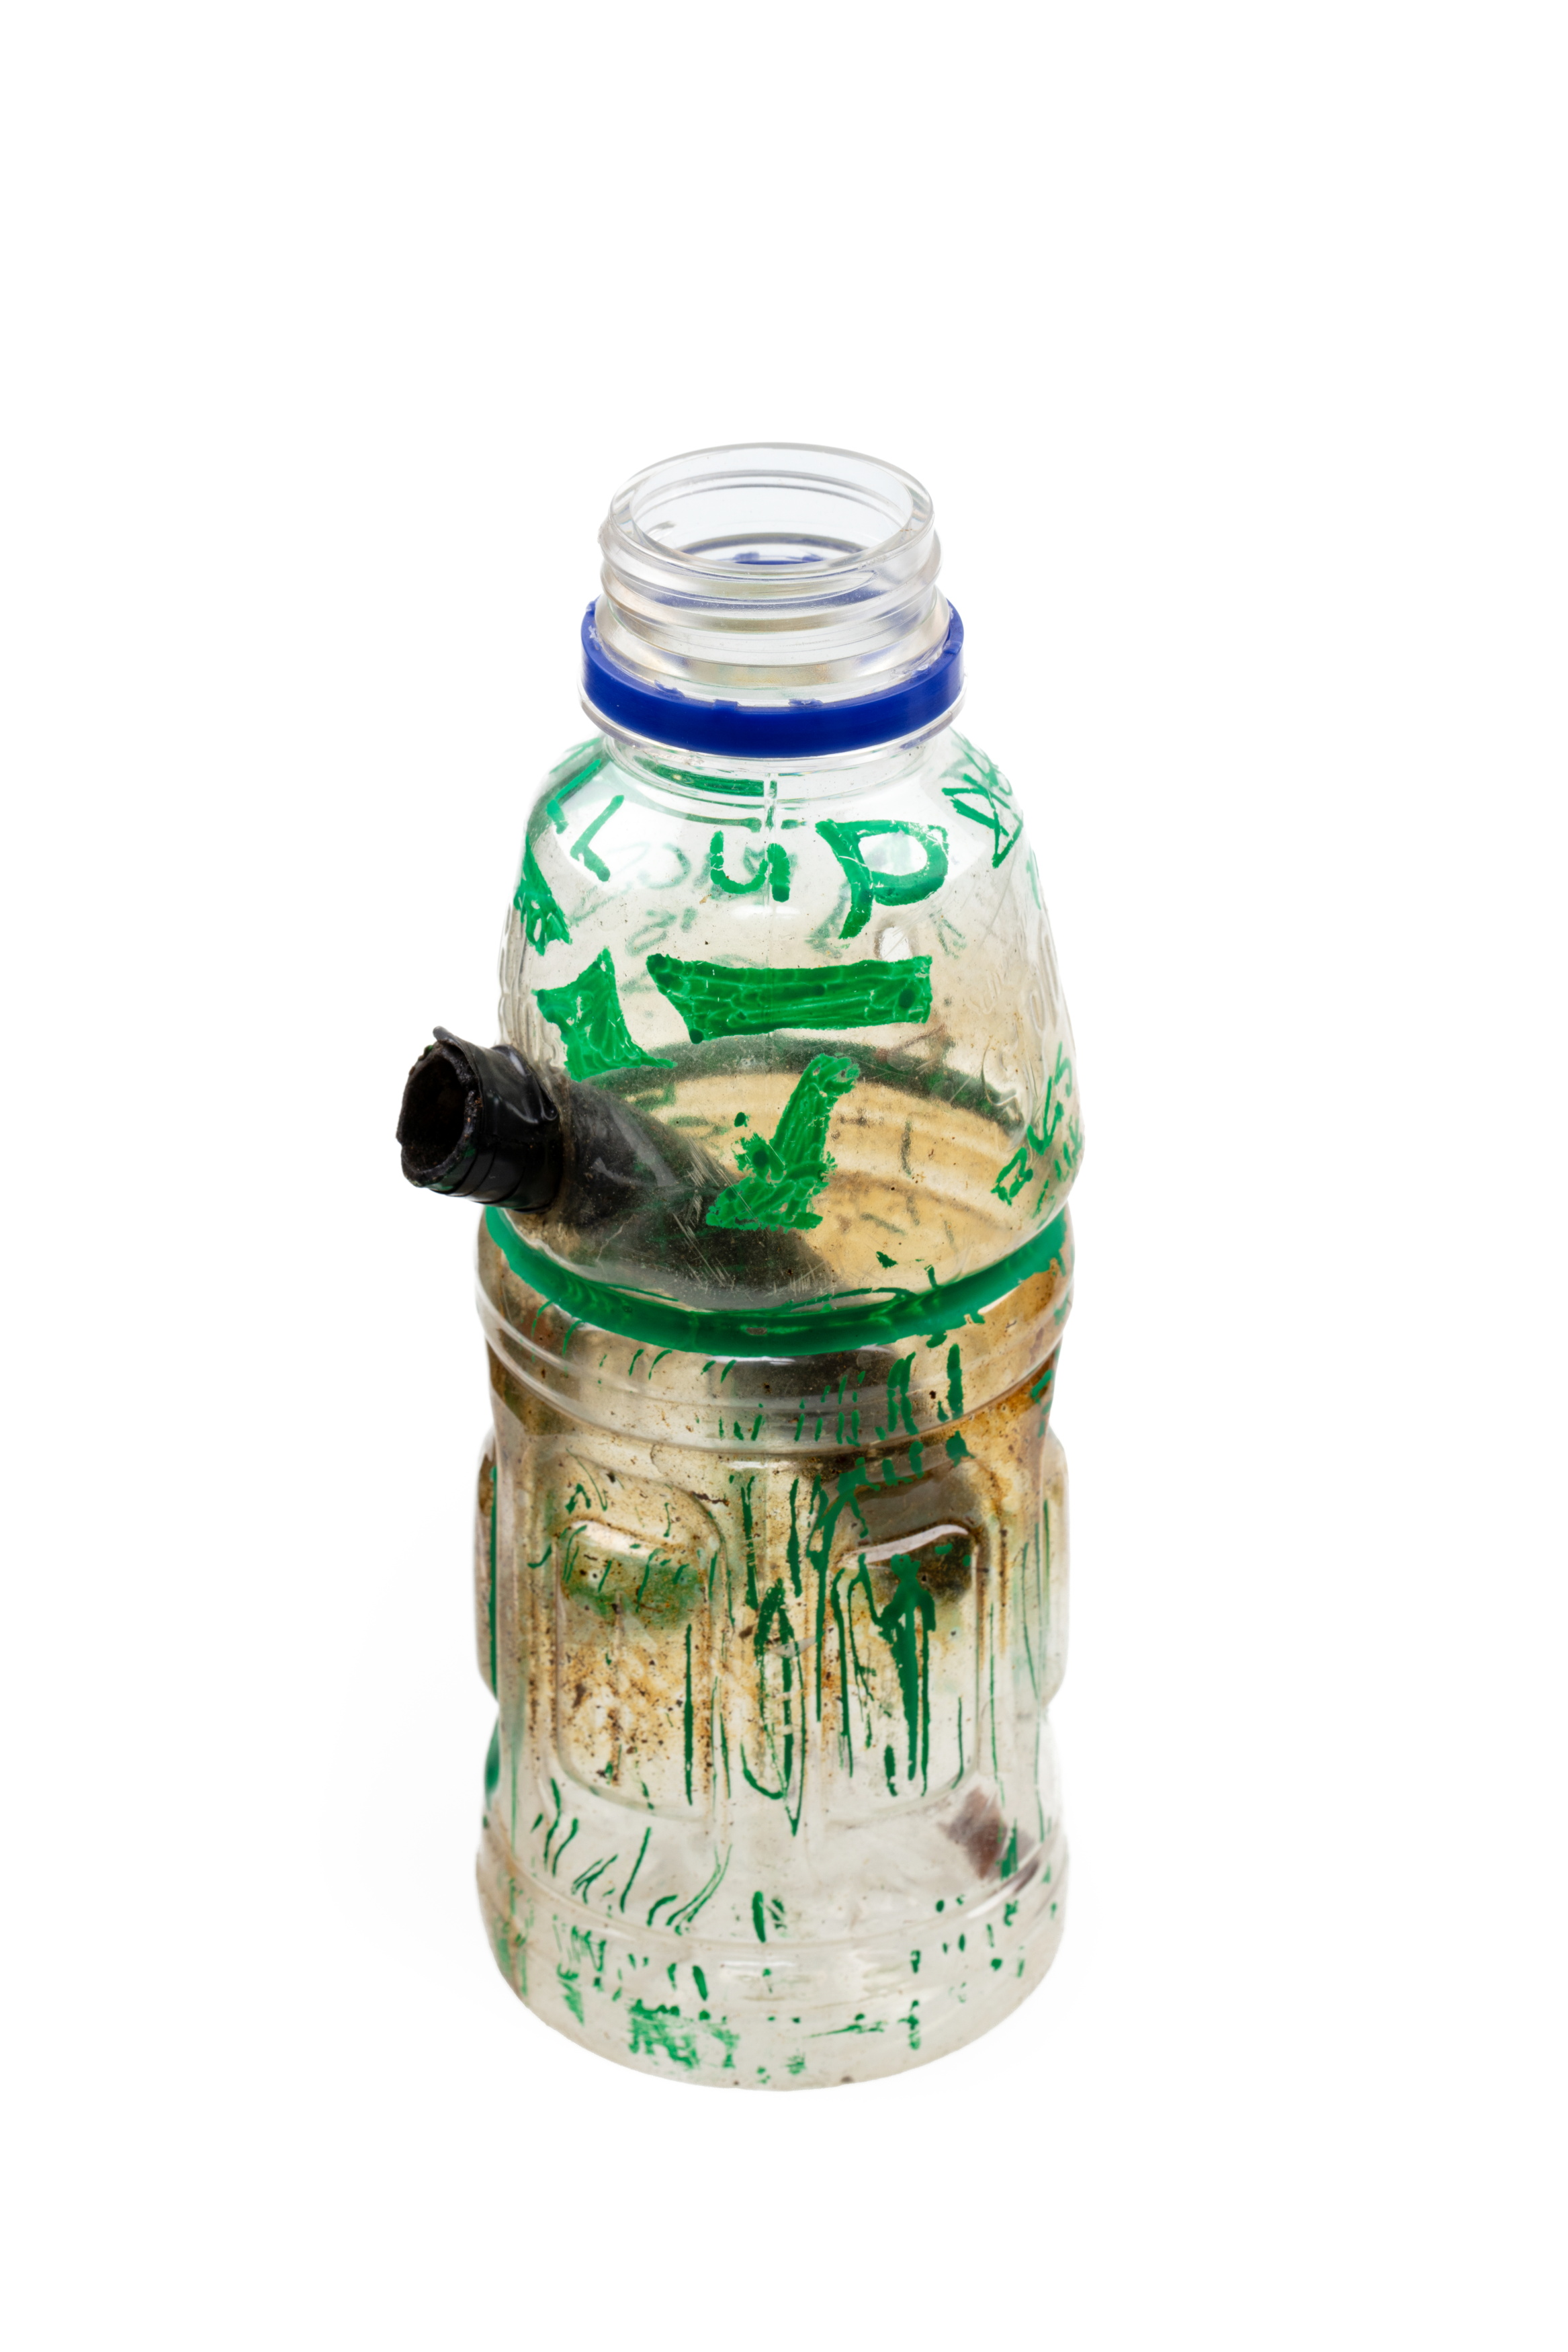 Bong made from a plastic drinking bottle